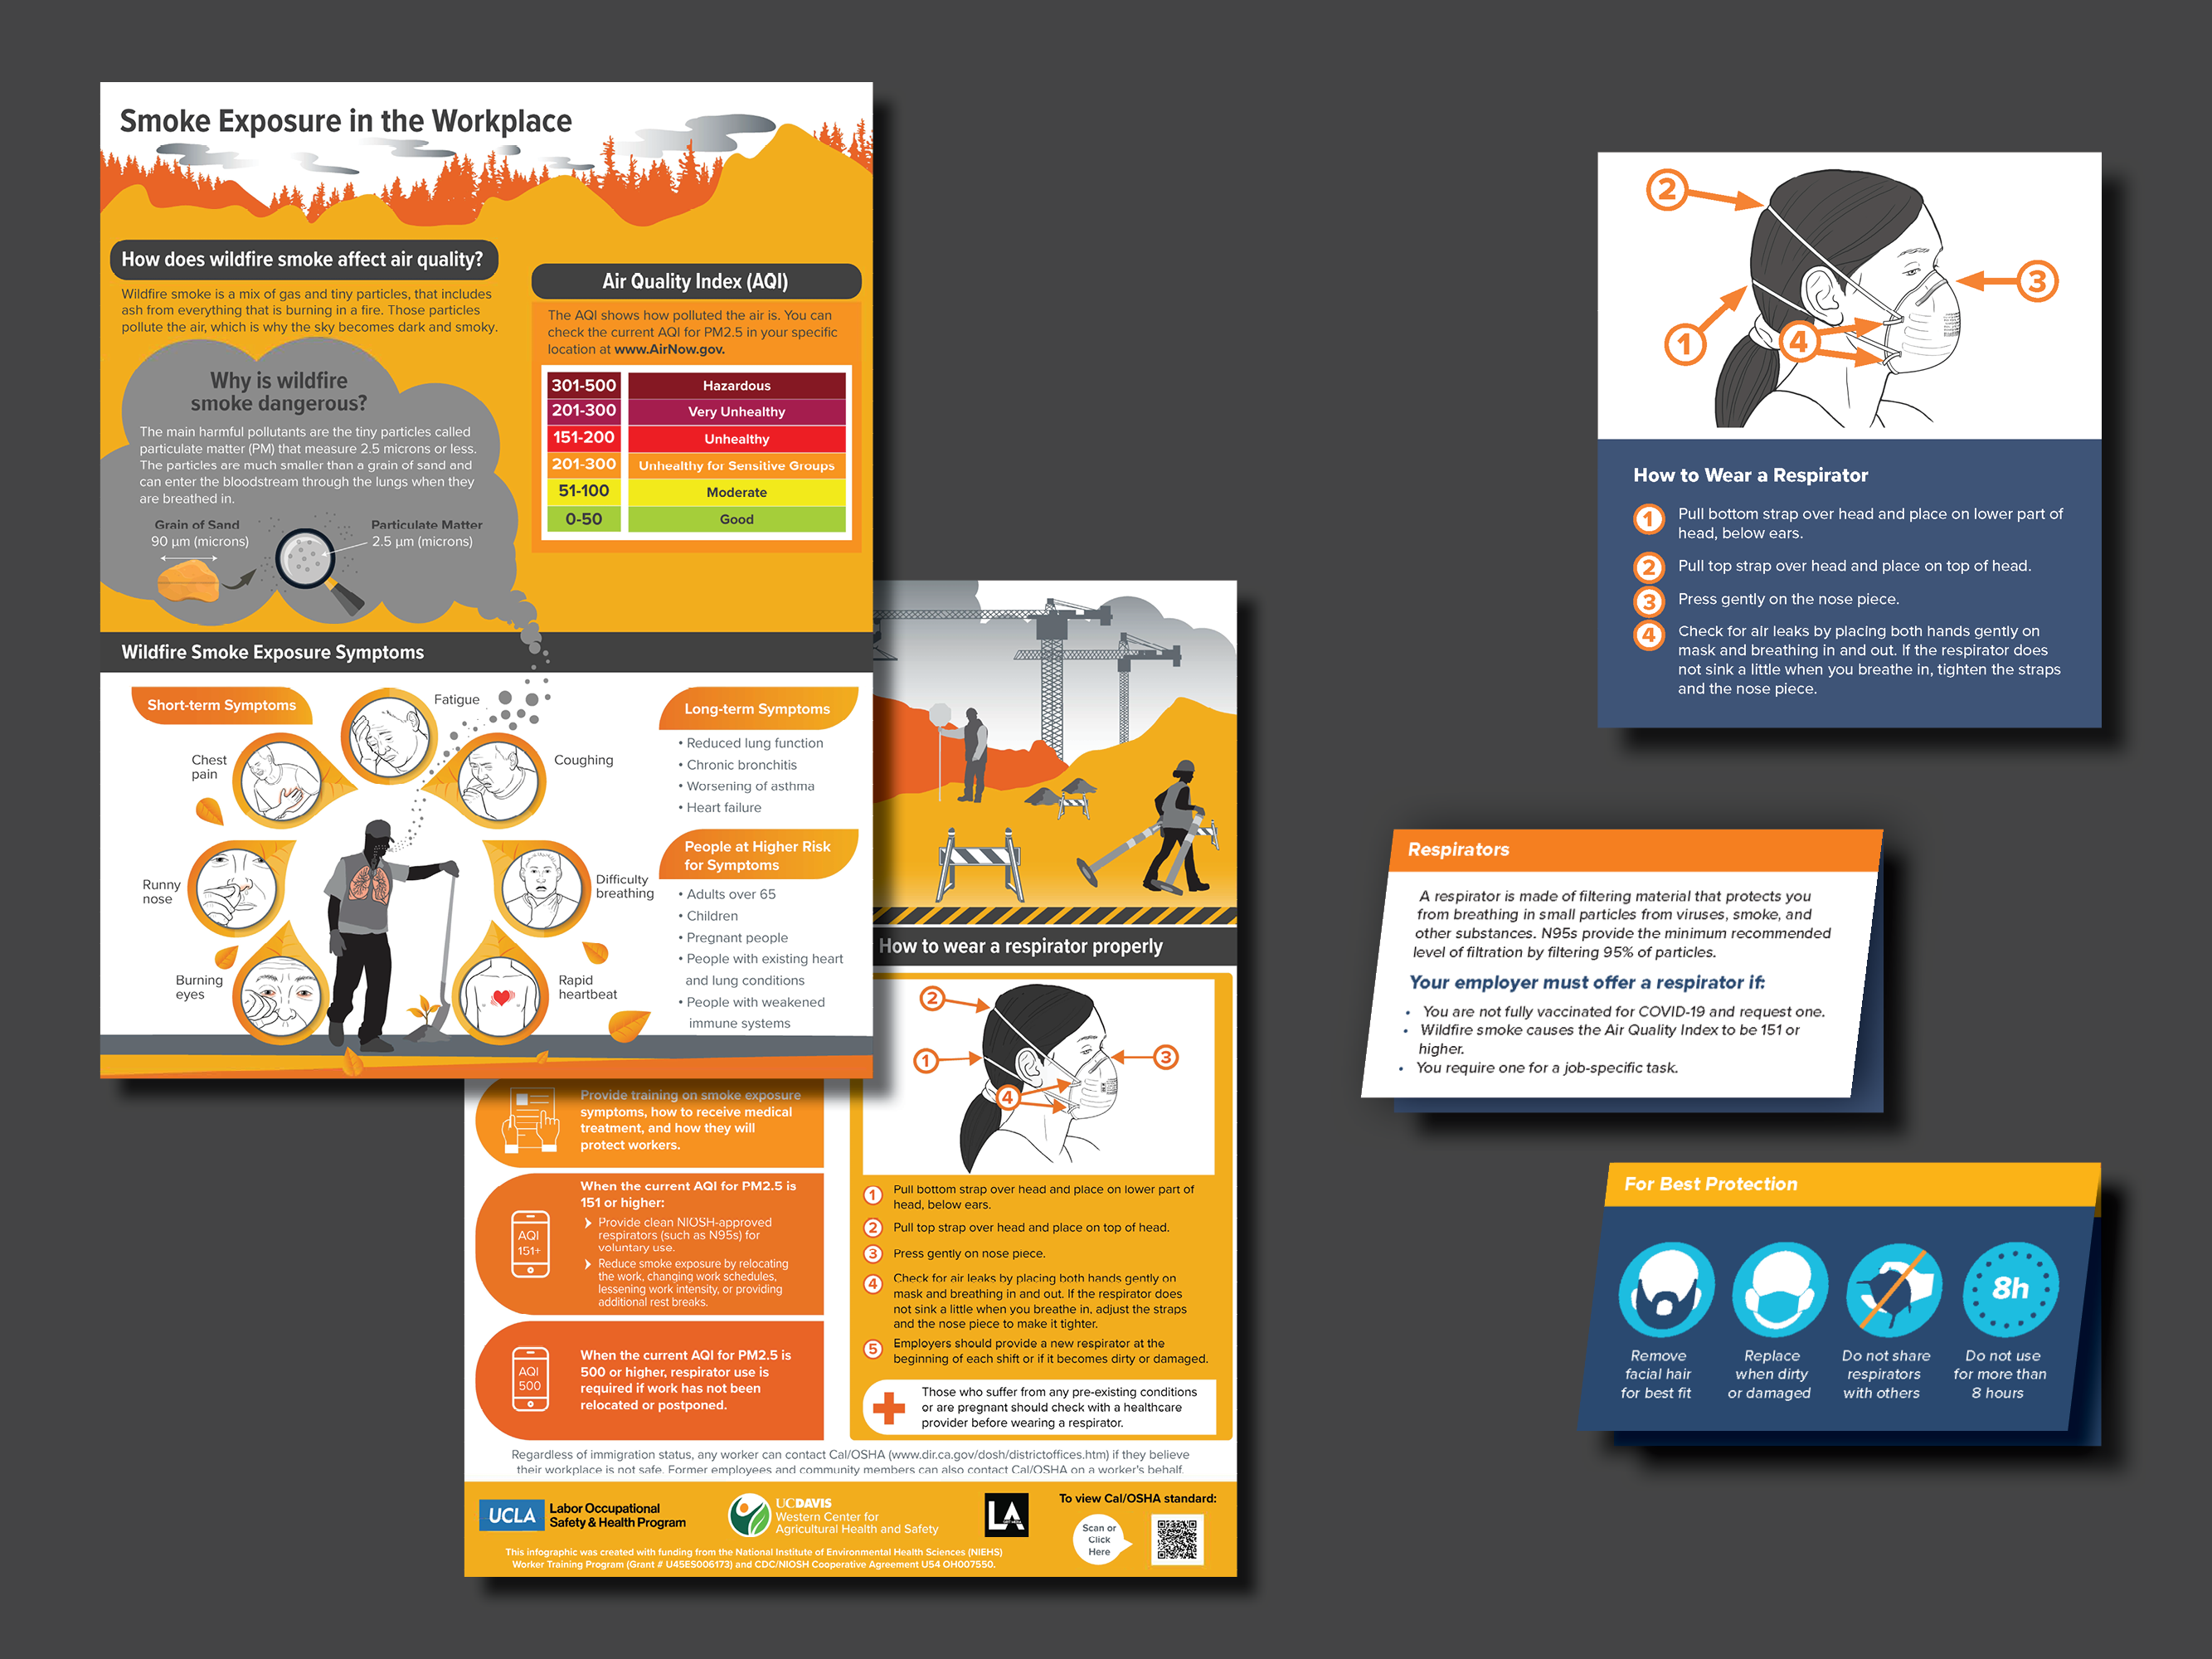 Images of Wildfire Smoke Infographic and Respirator Card in English